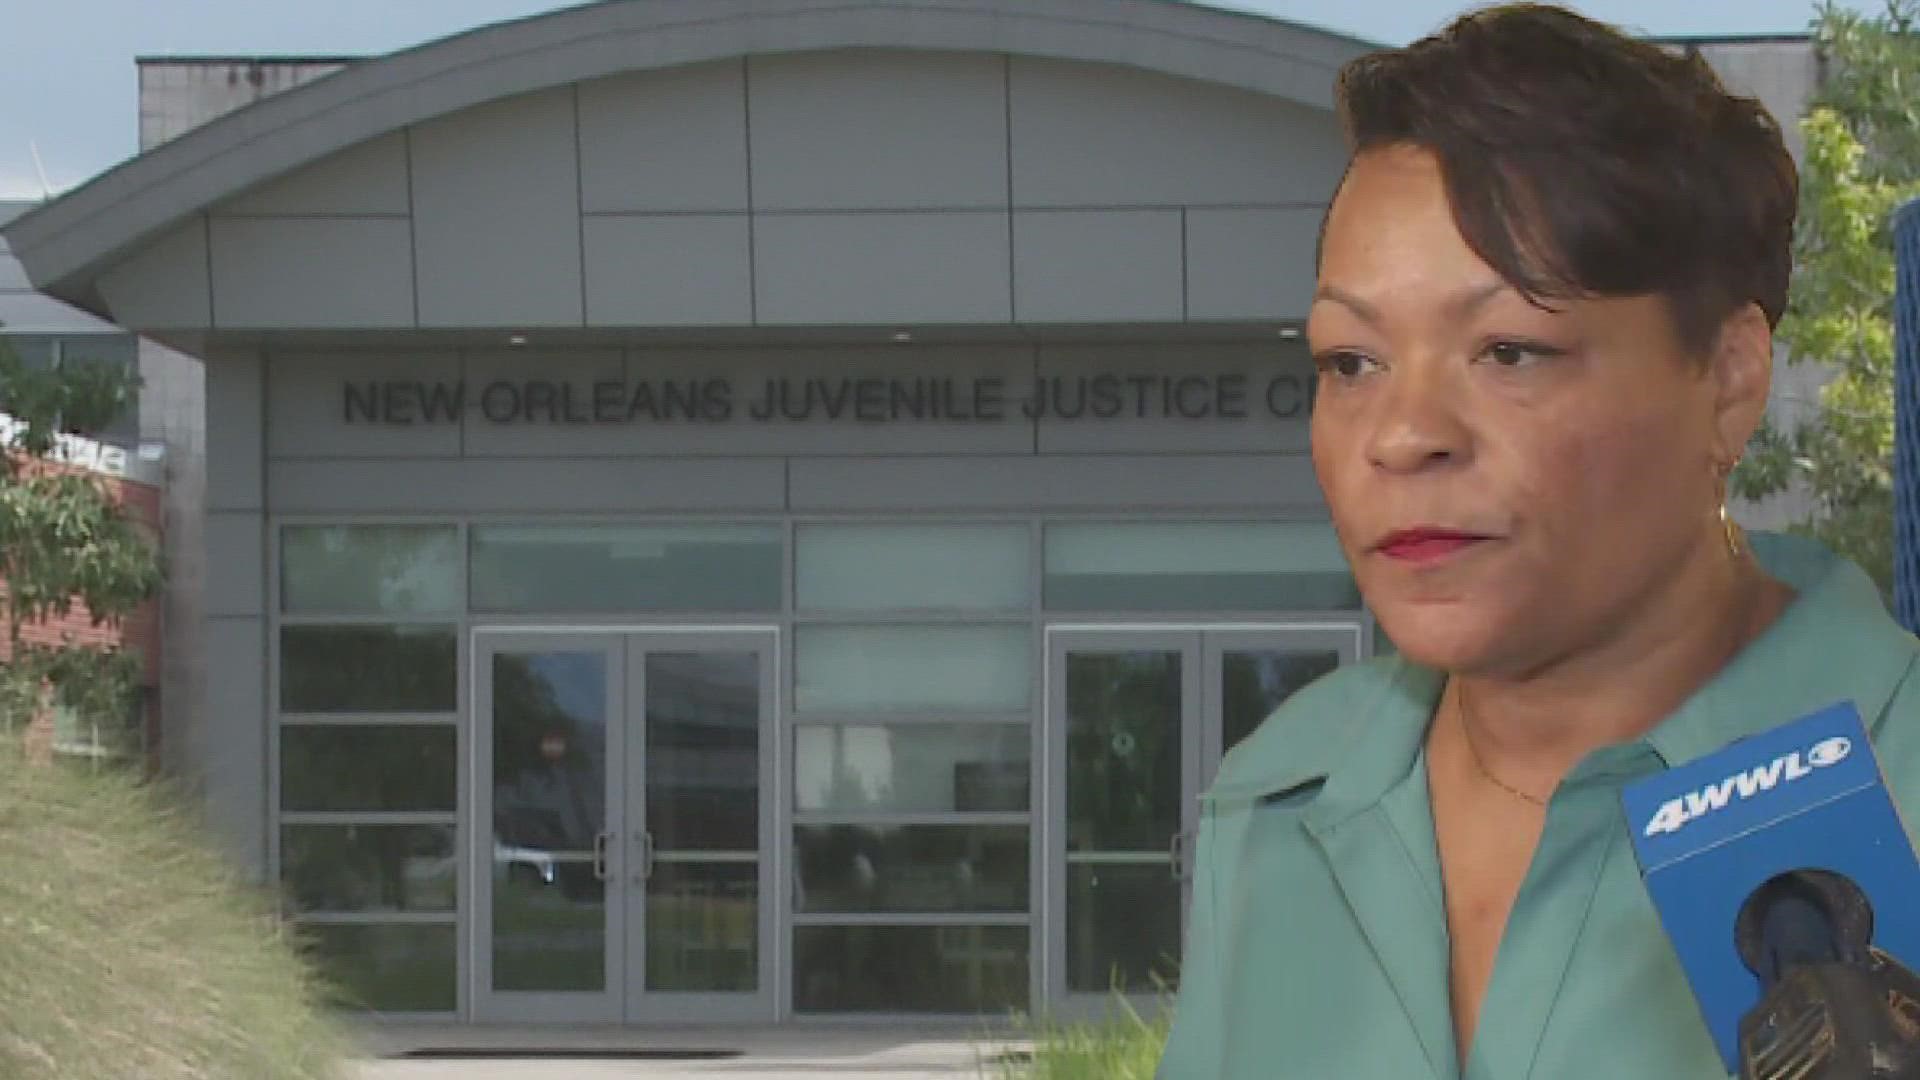 The victims say they were traumatized by the crimes and unnerved to see New Orleans Mayor LaToya Cantrell in court to support the suspect's family.